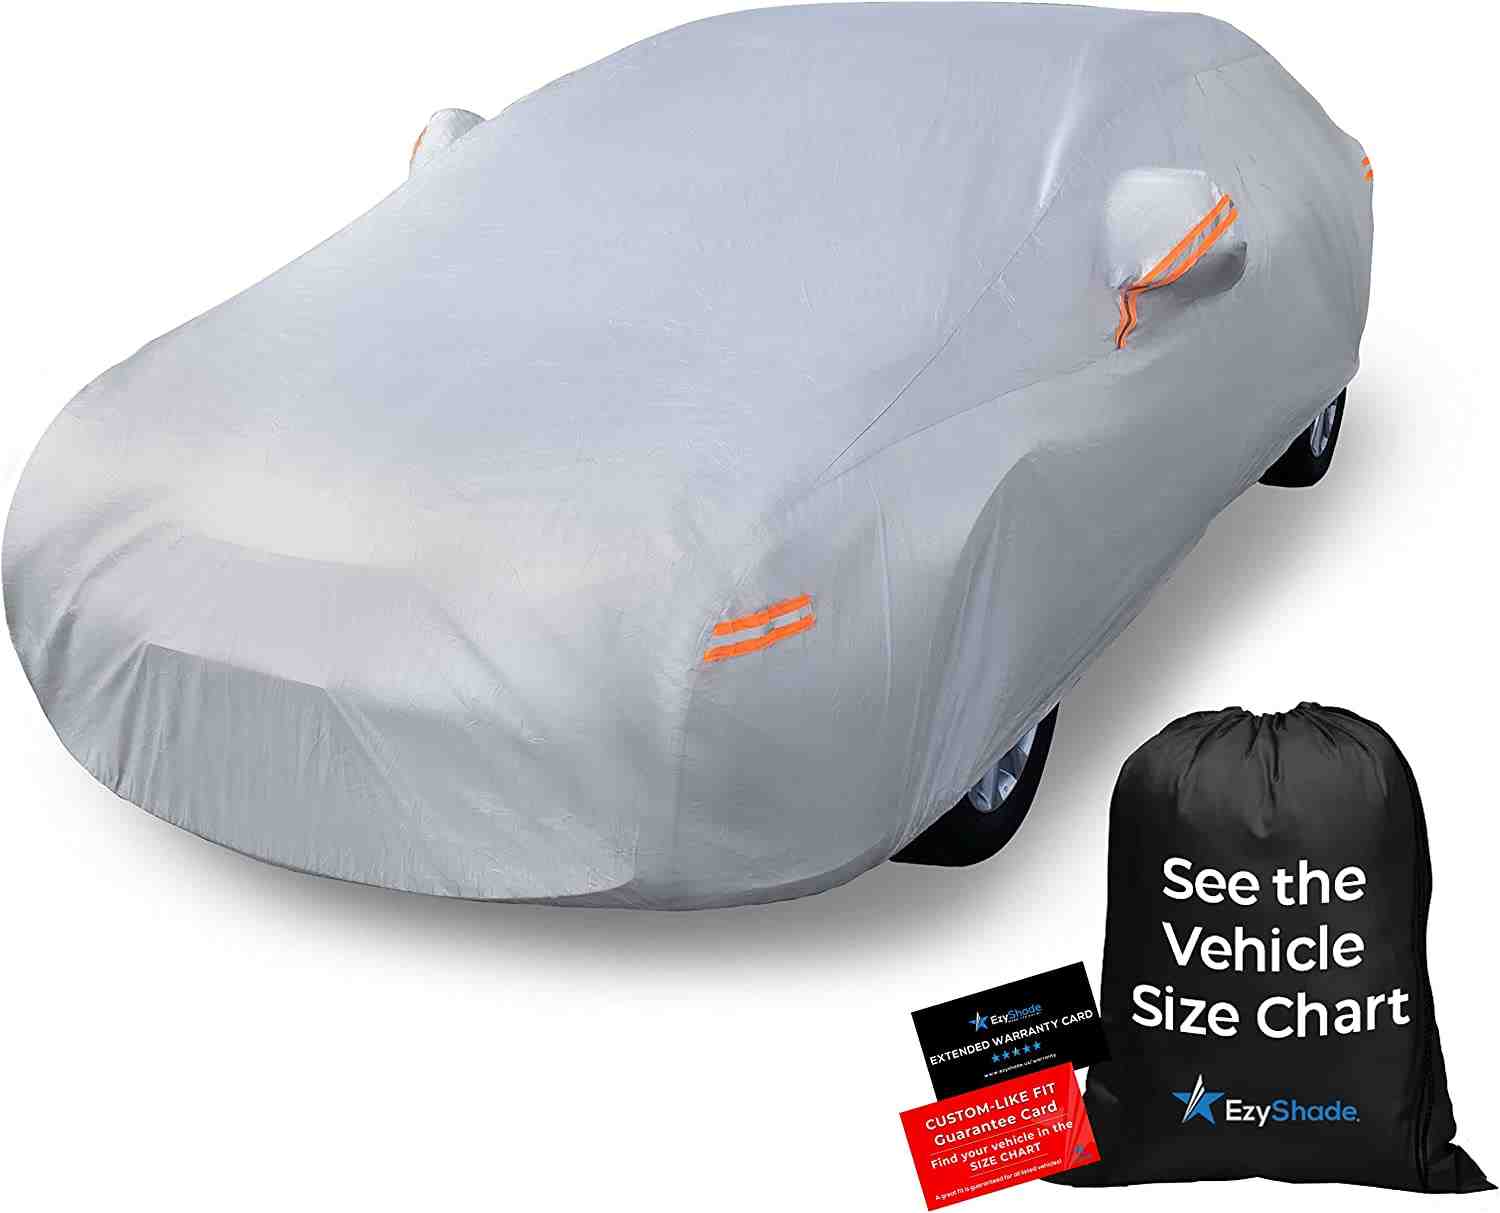 EzyShade 10-Layer extreme duty car cover